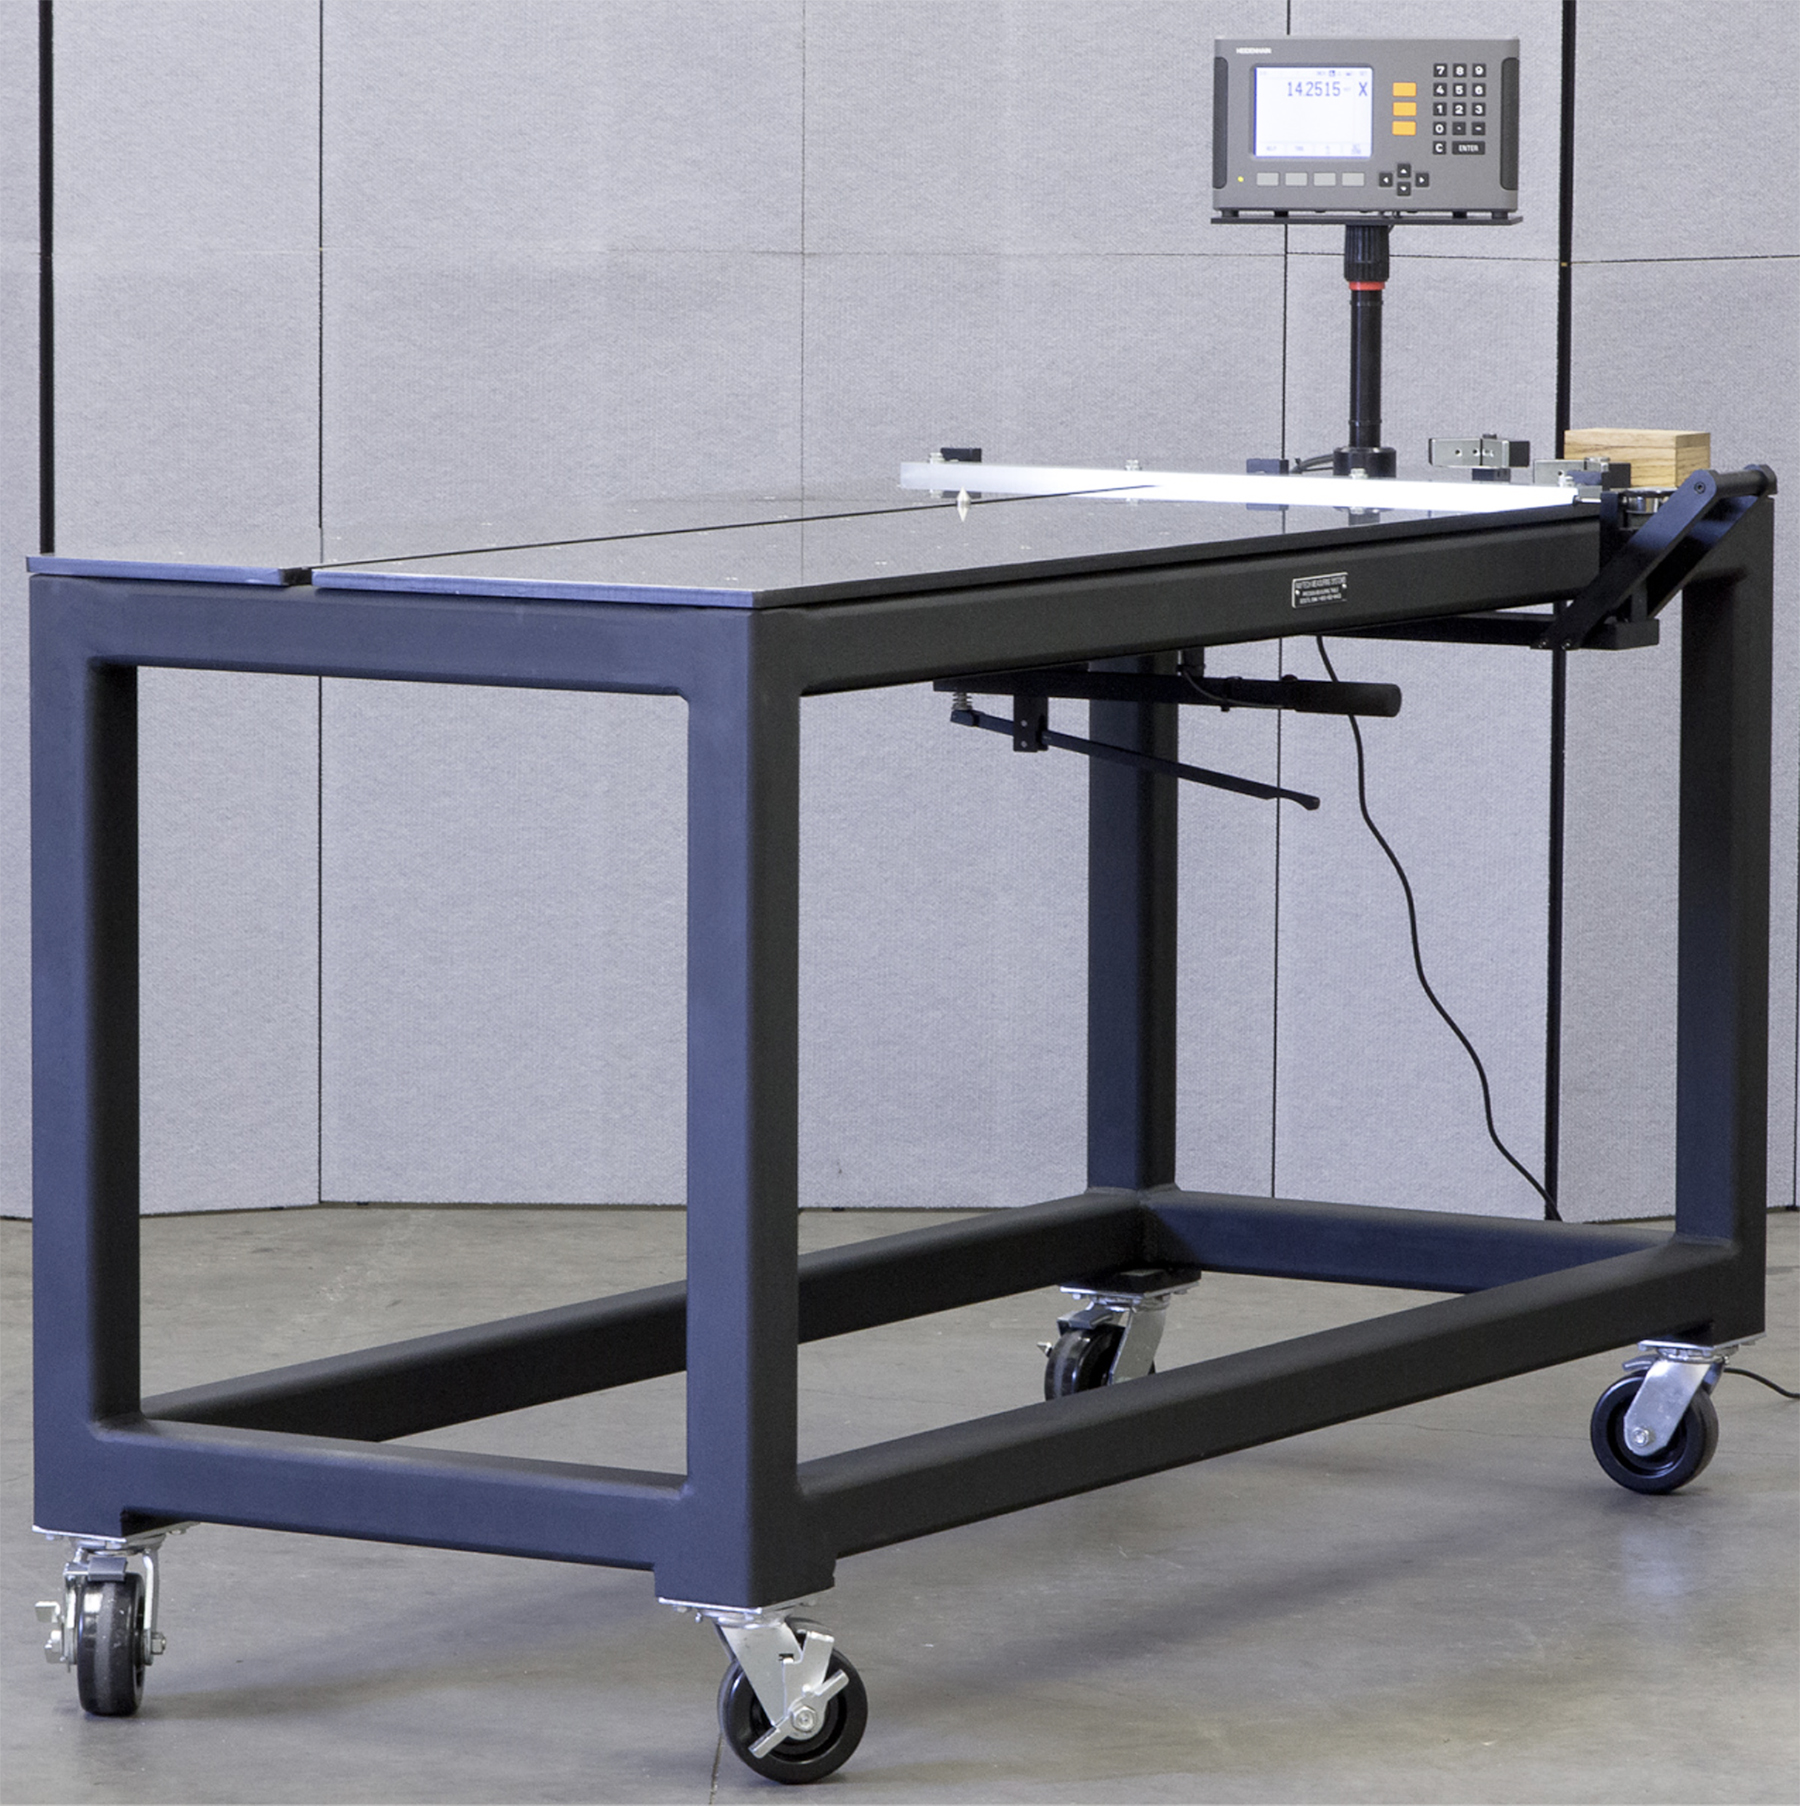 Exact Metrology Offers Raytech Measuring Tables Quality Digest